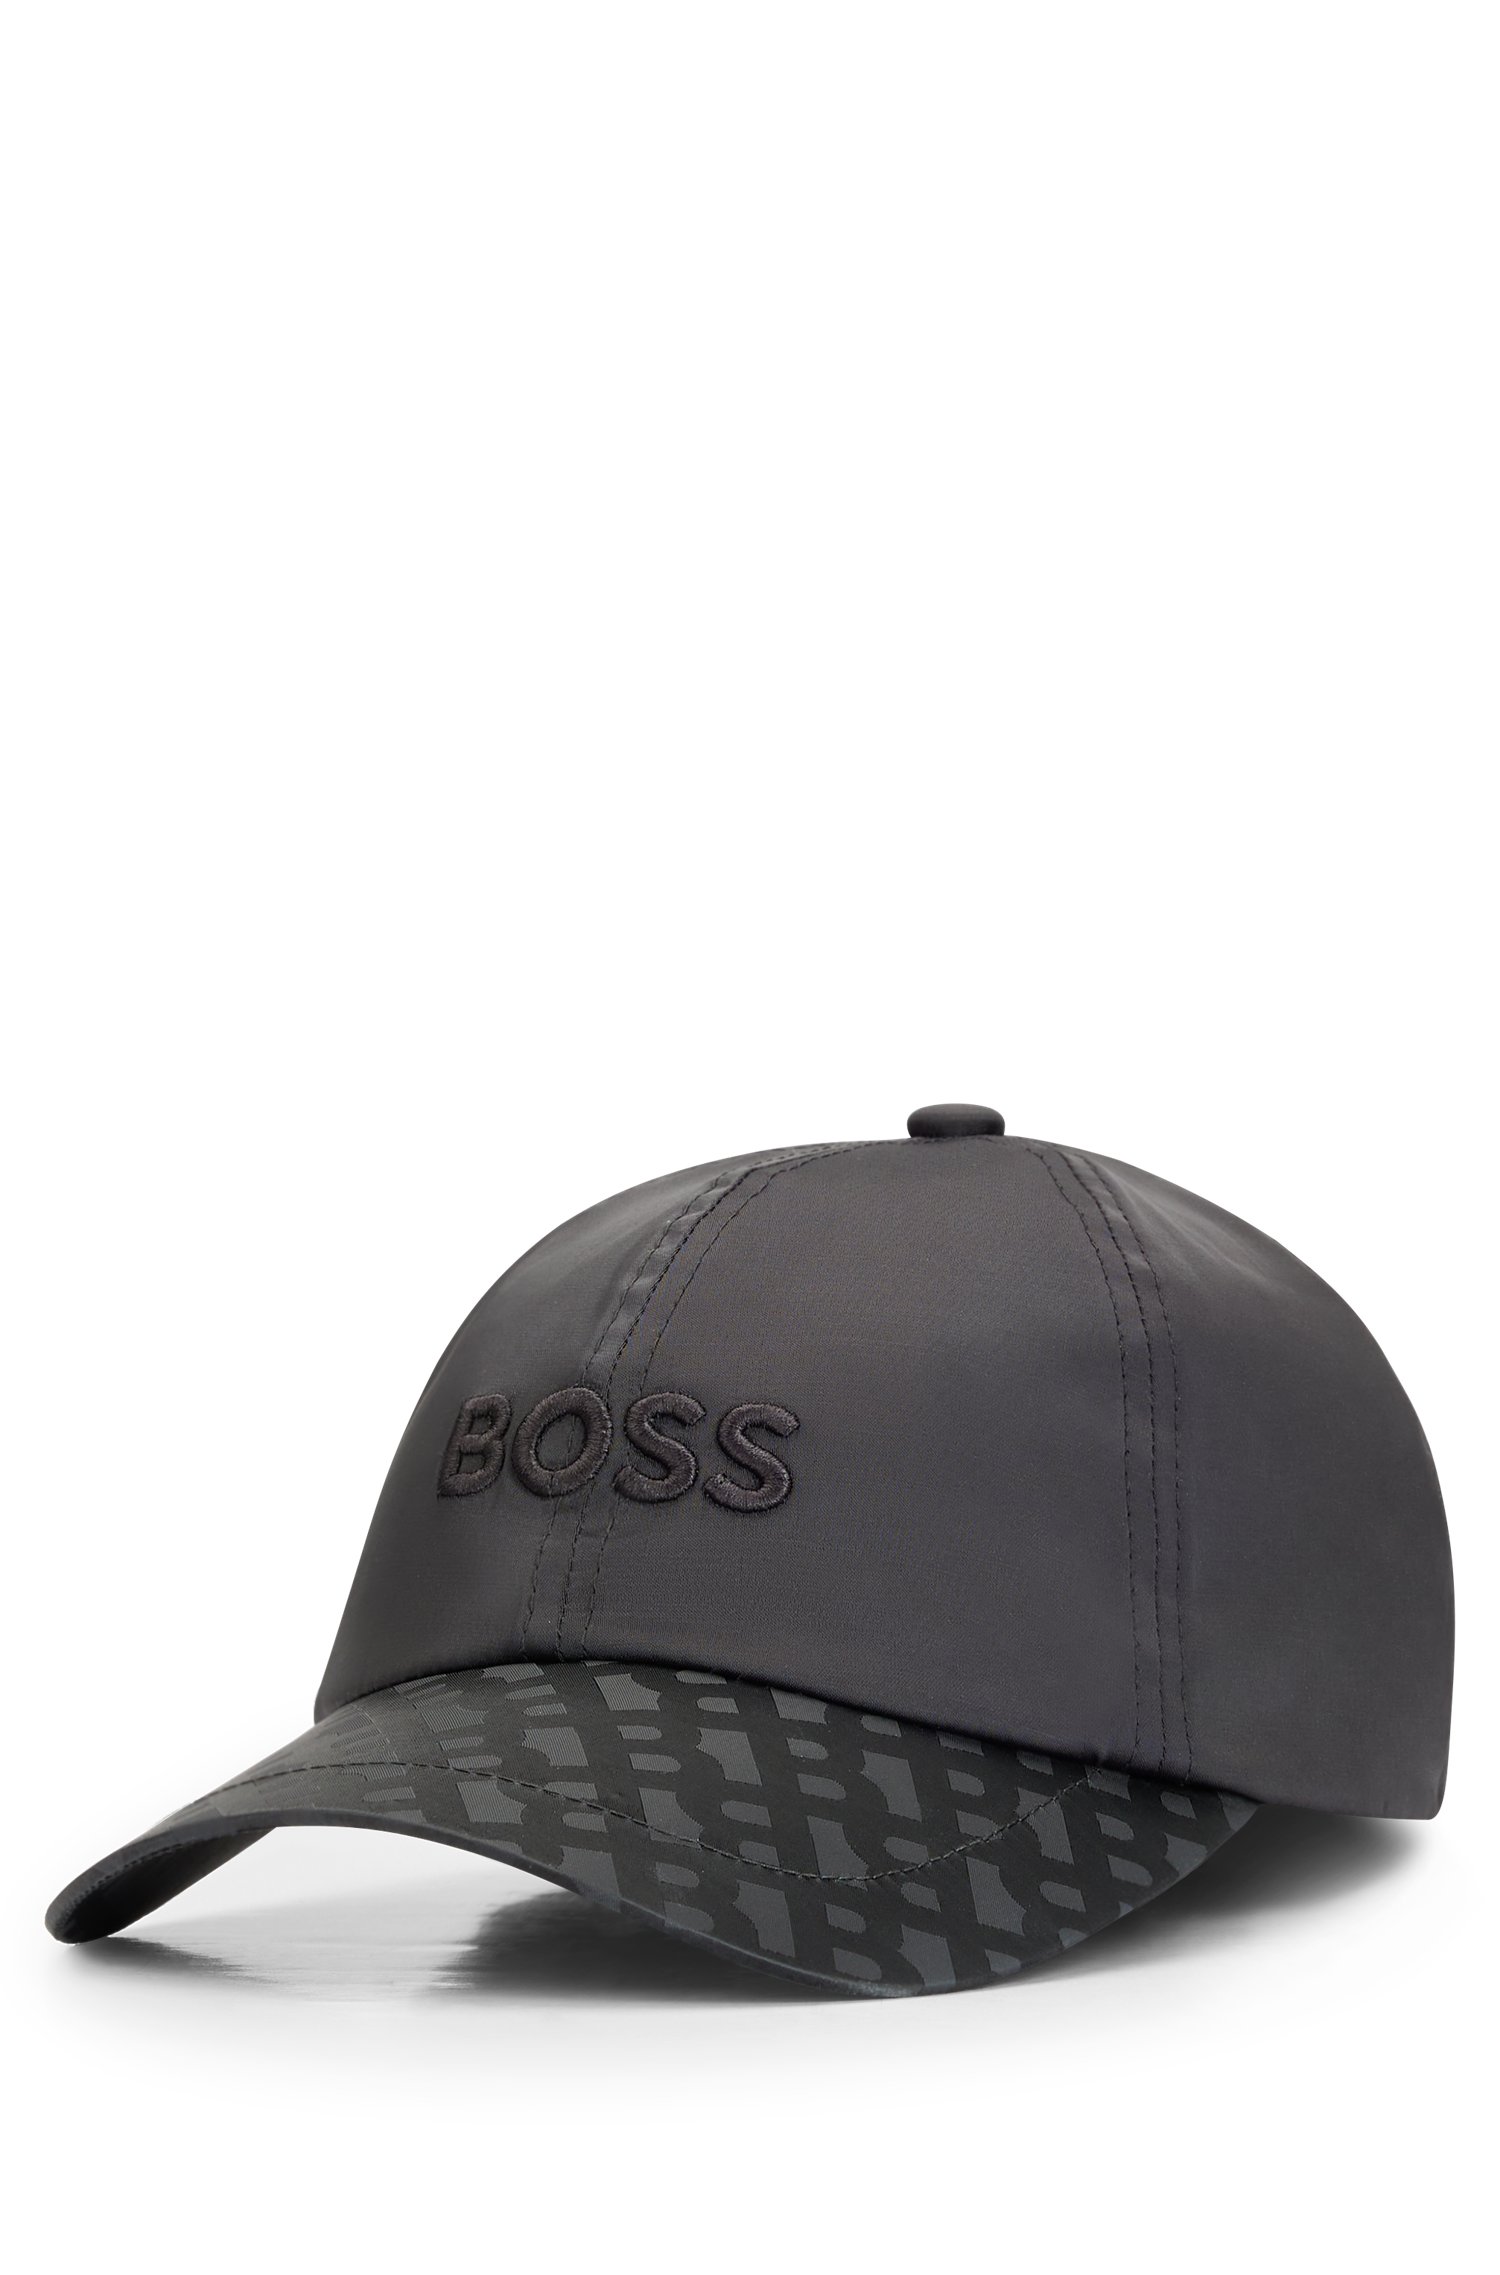 Satin cap with embroidered logo and monogram visor